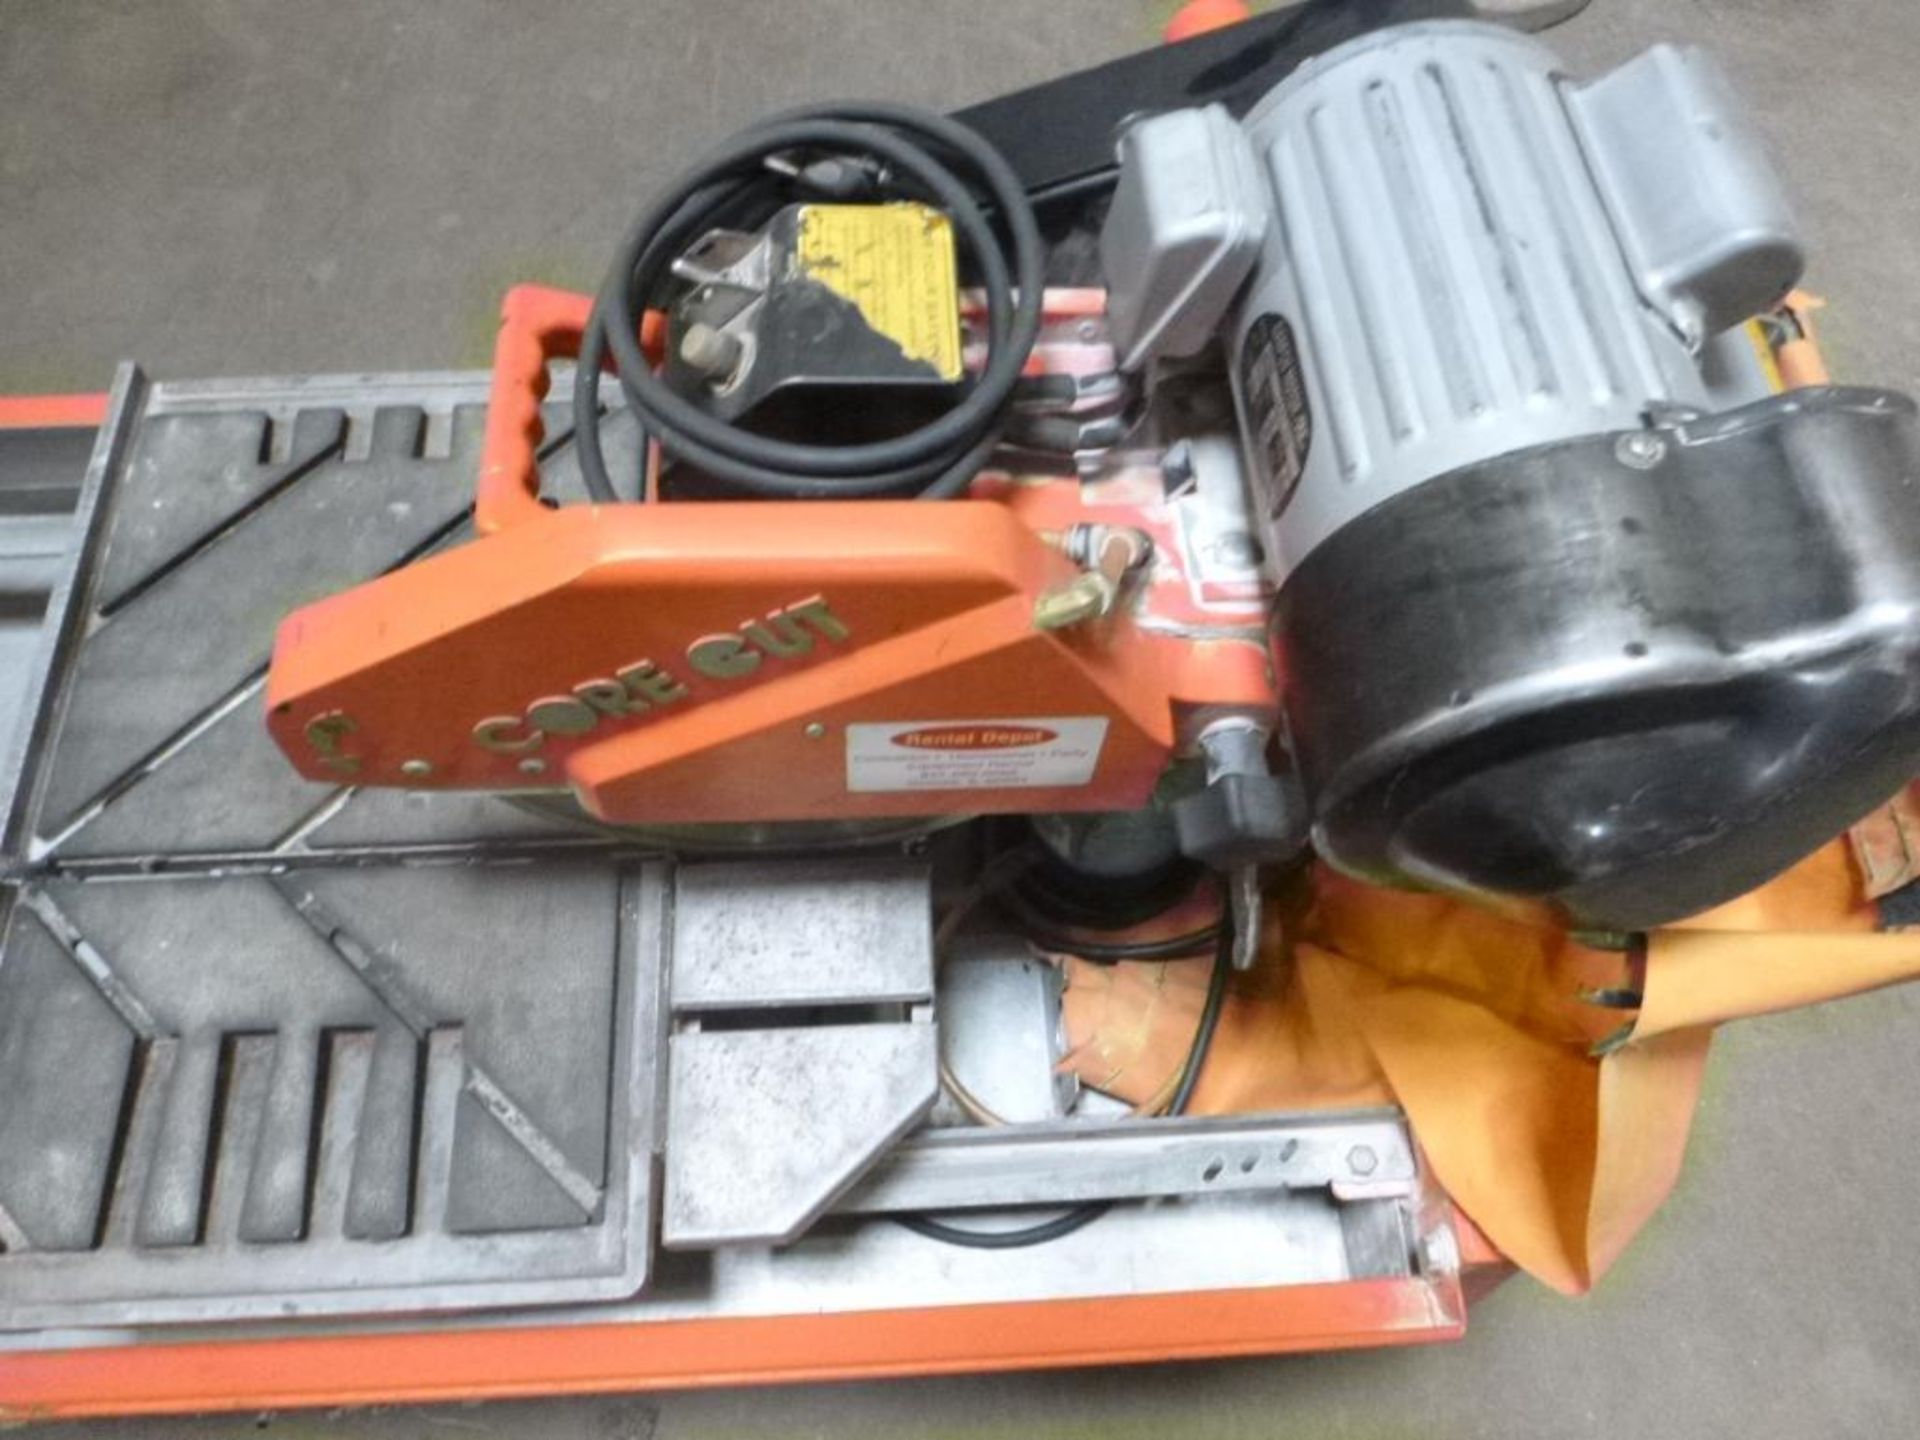 LOT: Core Cut CC1000T 10 in. Tile Saw, S/N CC110163, with Stand, Cuts 24 in. Tile - Image 3 of 8